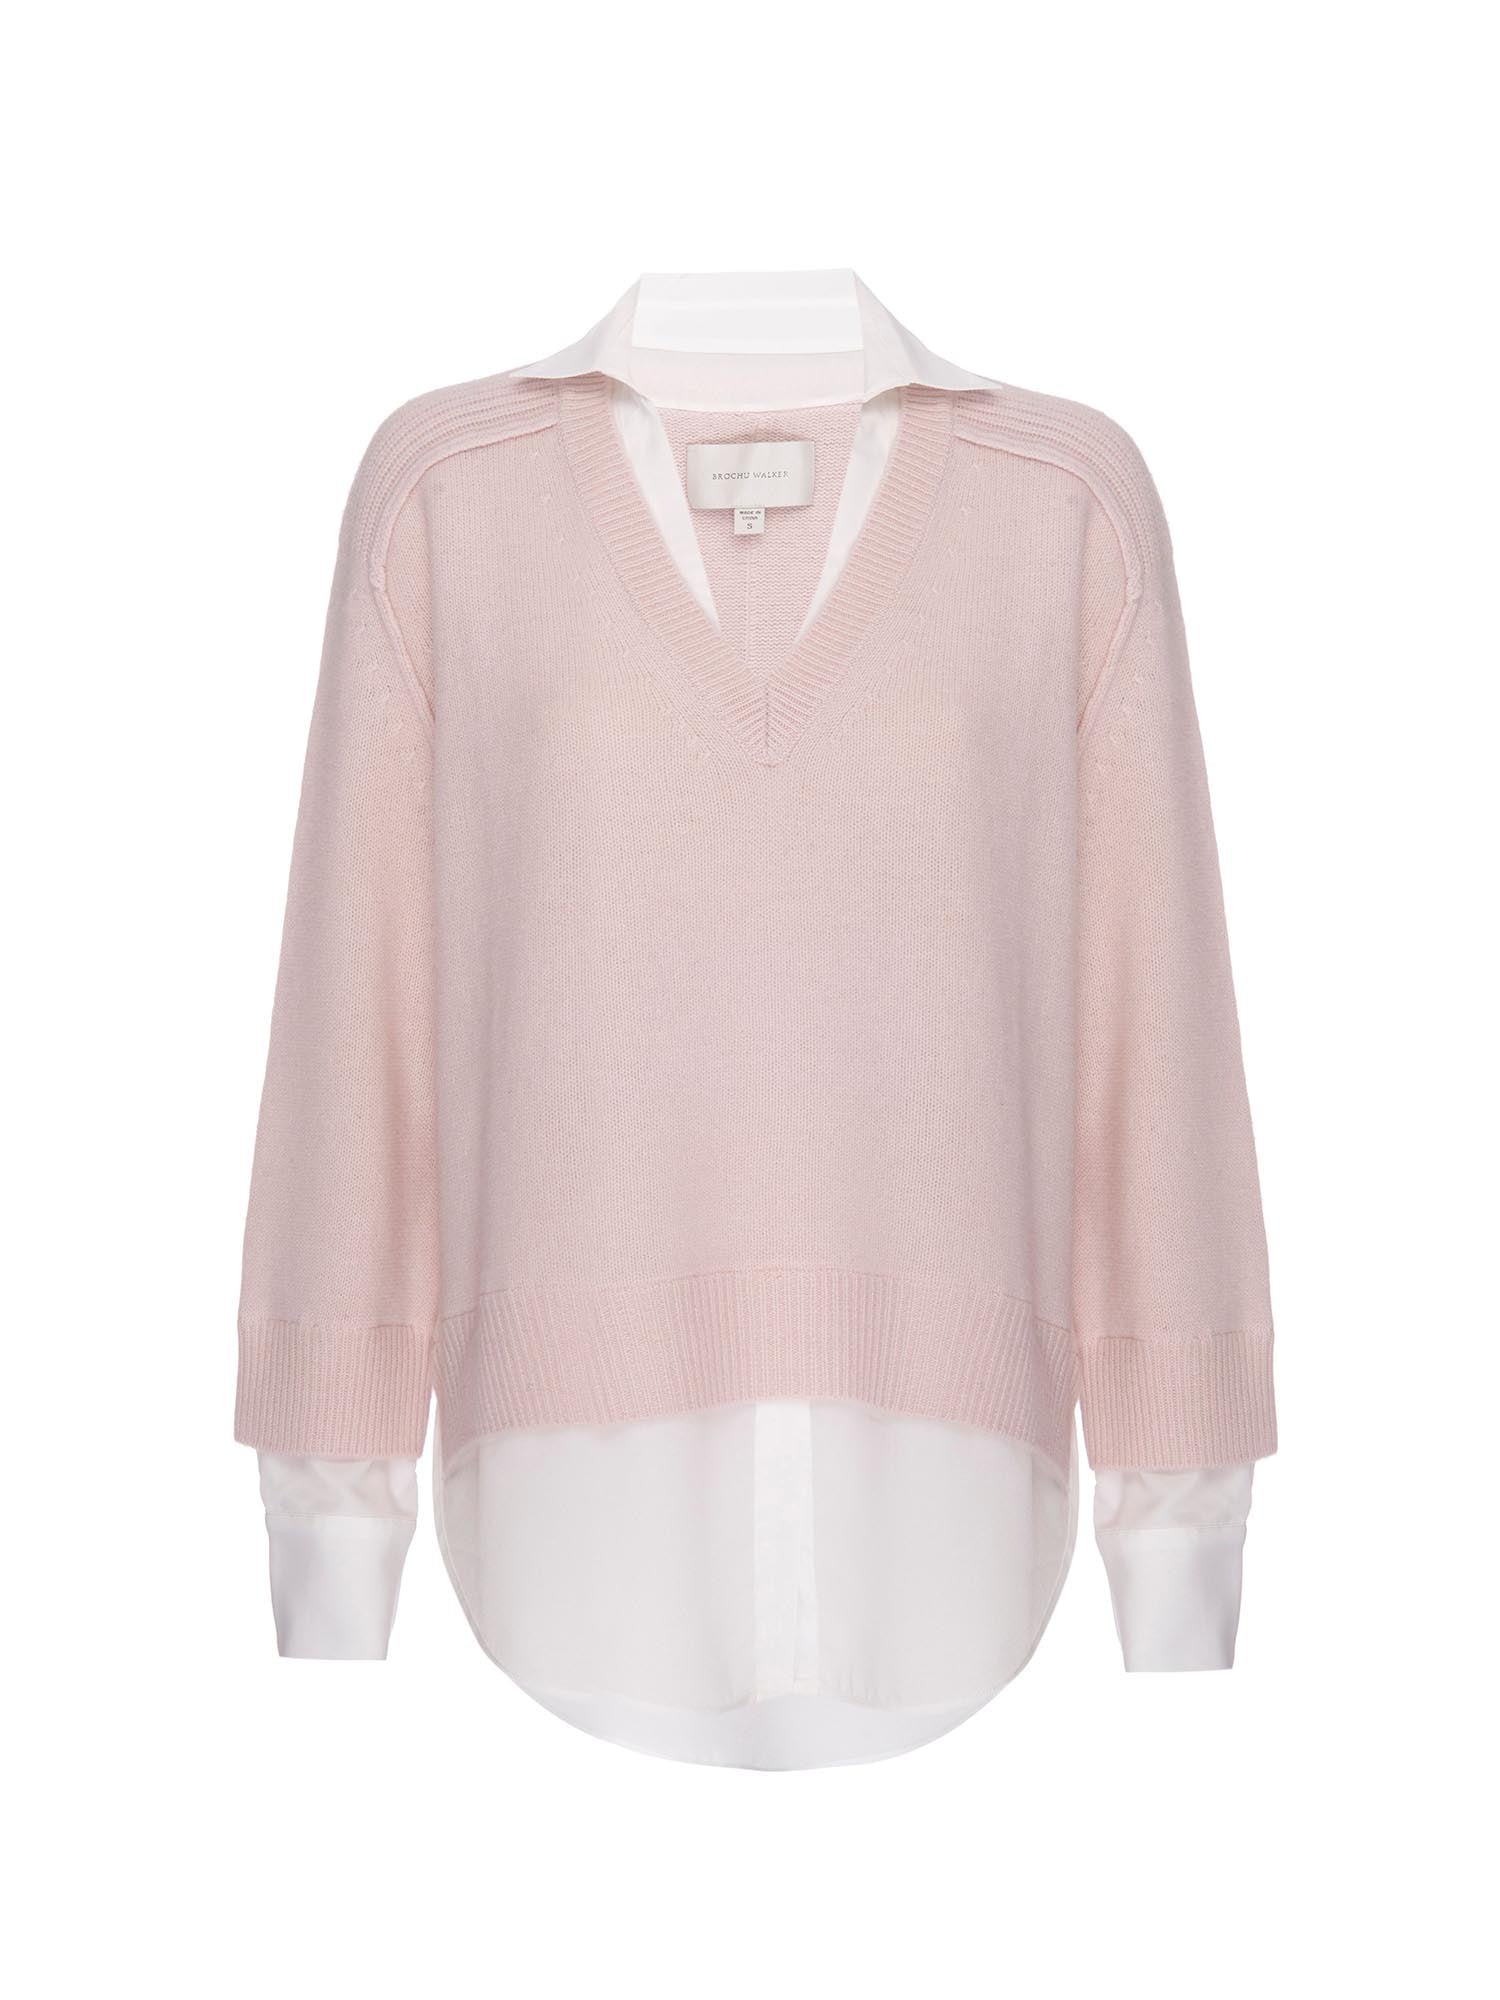 Looker pink layered v-neck sweater flat view